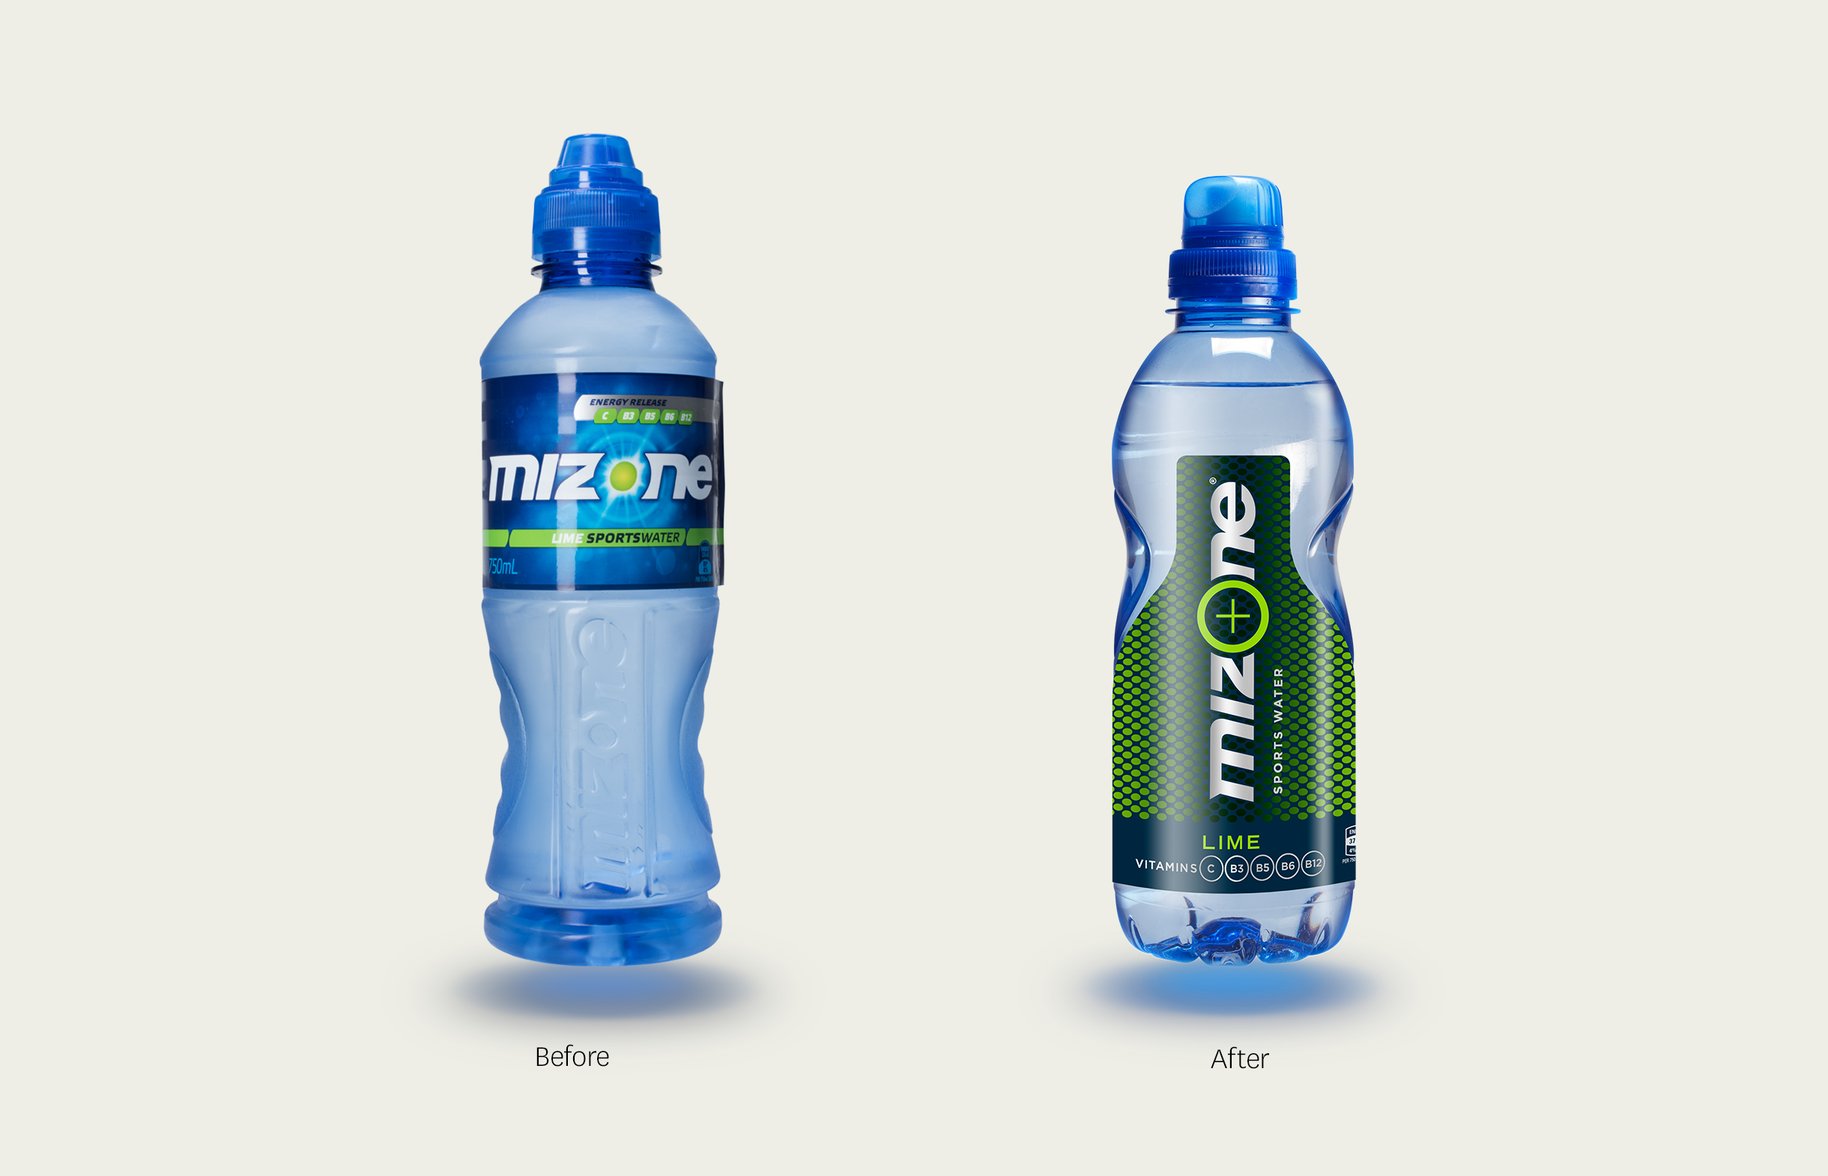 Mizone Before and After comparison 